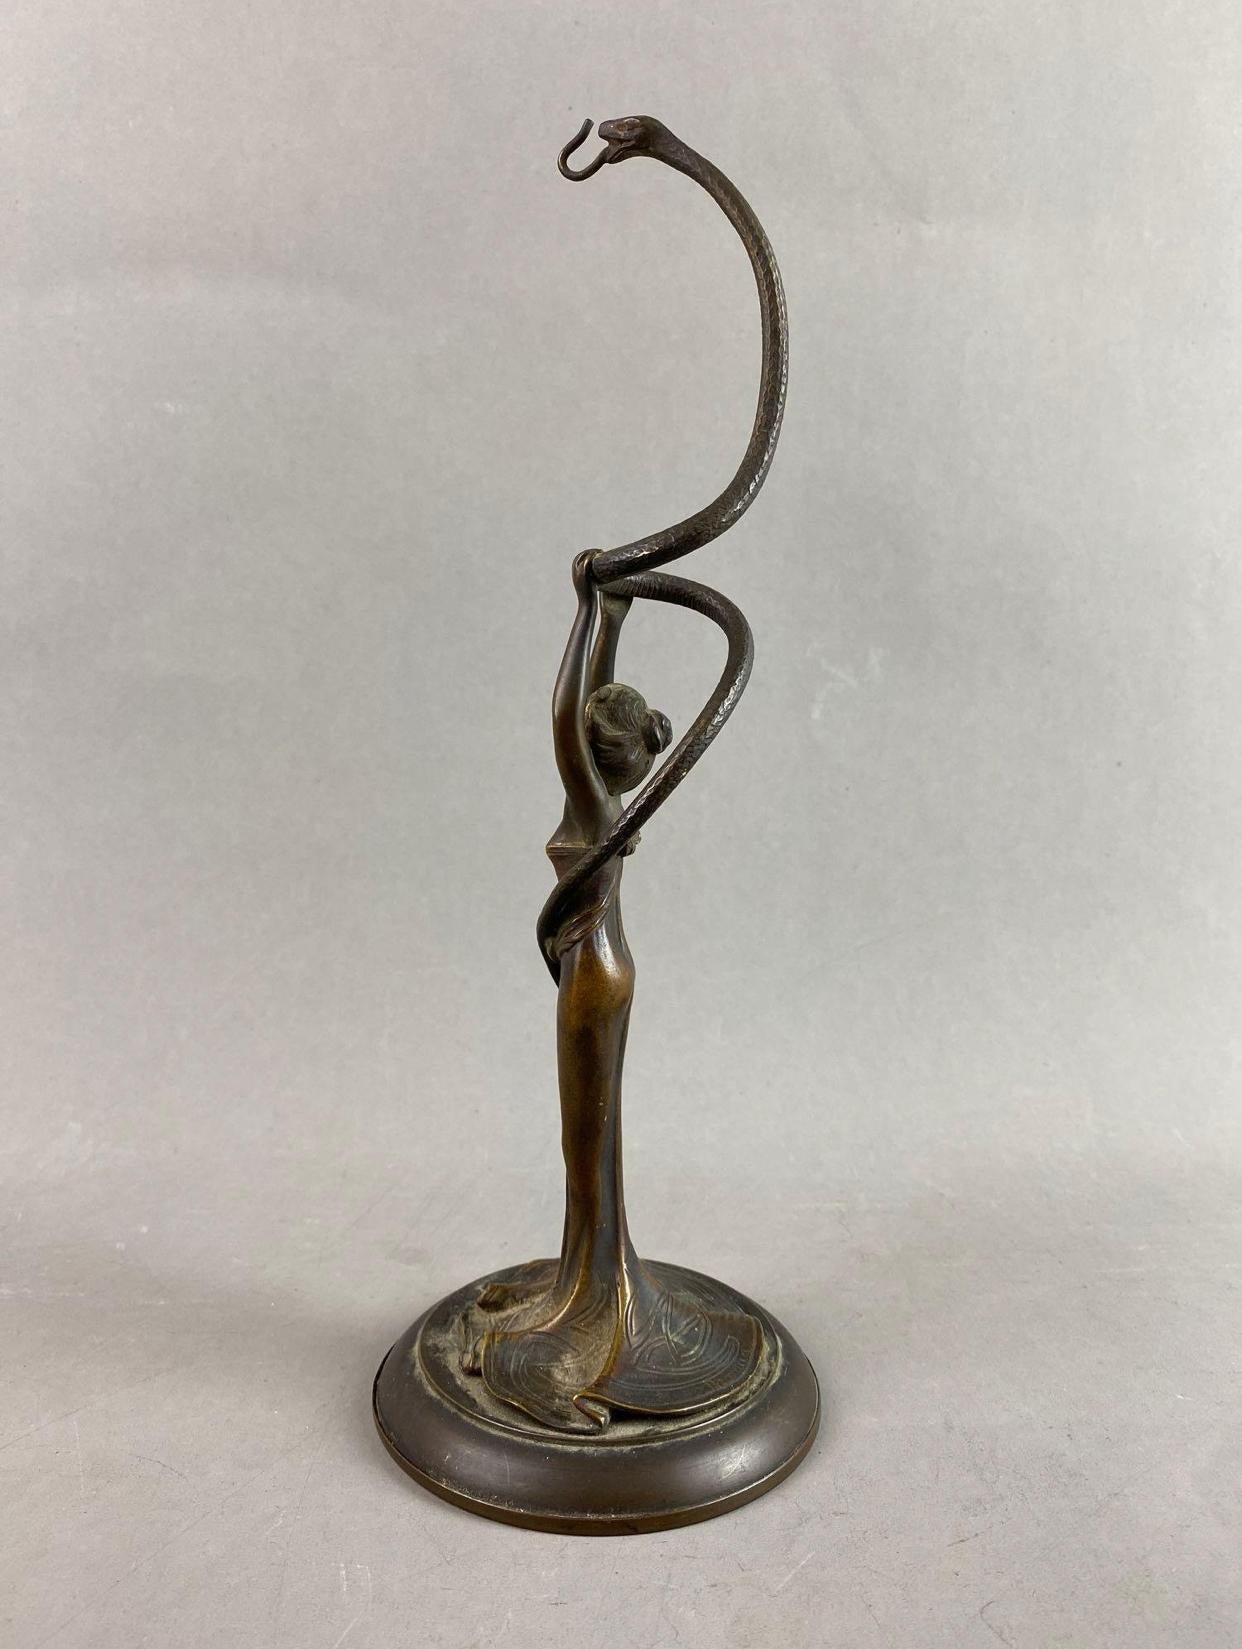 Bronze statue of a young woman in a strapless dress with a billowing bottom, holding a large snake. At one time the piece was d’or bronze, although most of the gold leafing has rubbed off. In the style of Franz Bergman. Unsigned. 